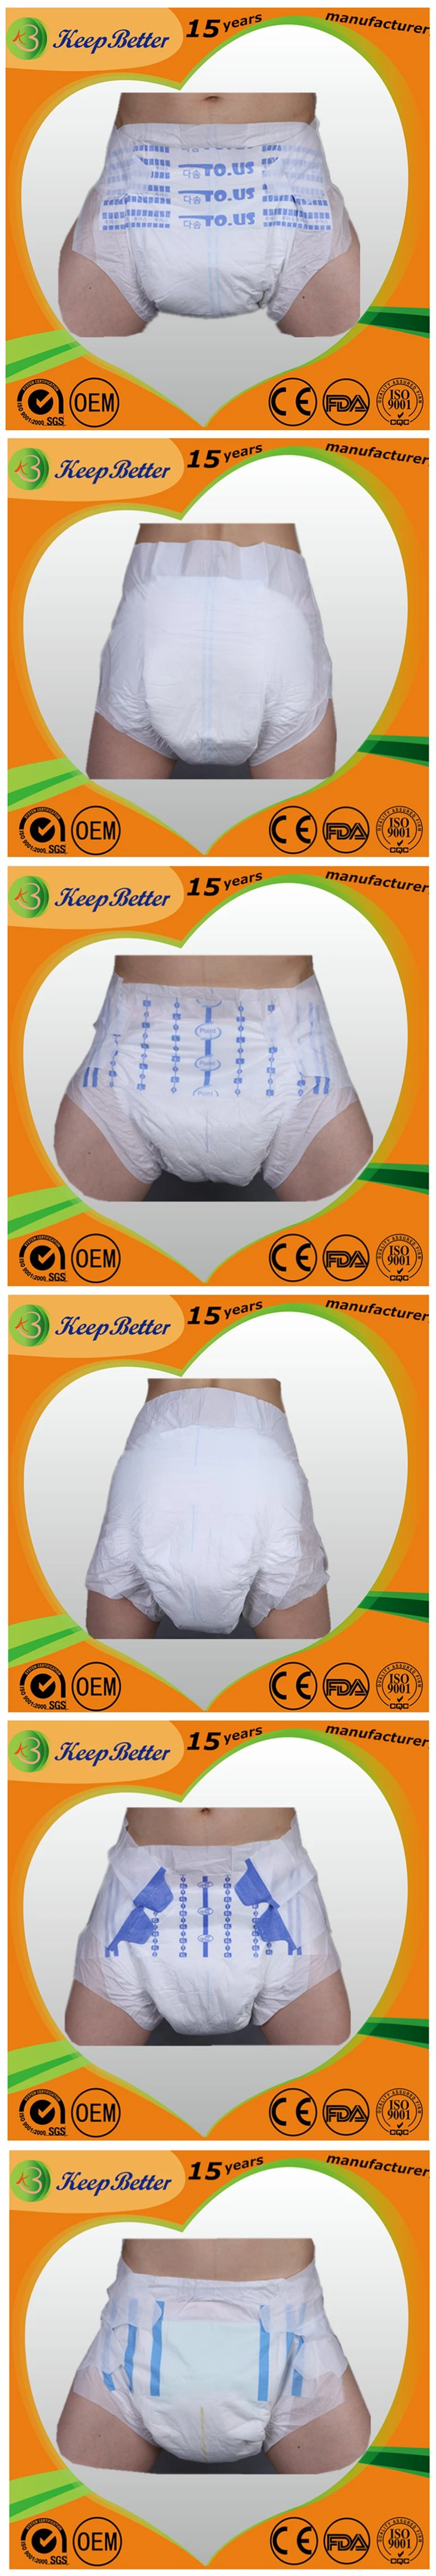 Incontinence Briefs Premium with Medical Tape Adult Diaper with Wetness Indicator Incontinence Diaper Briefs for Overnight Use